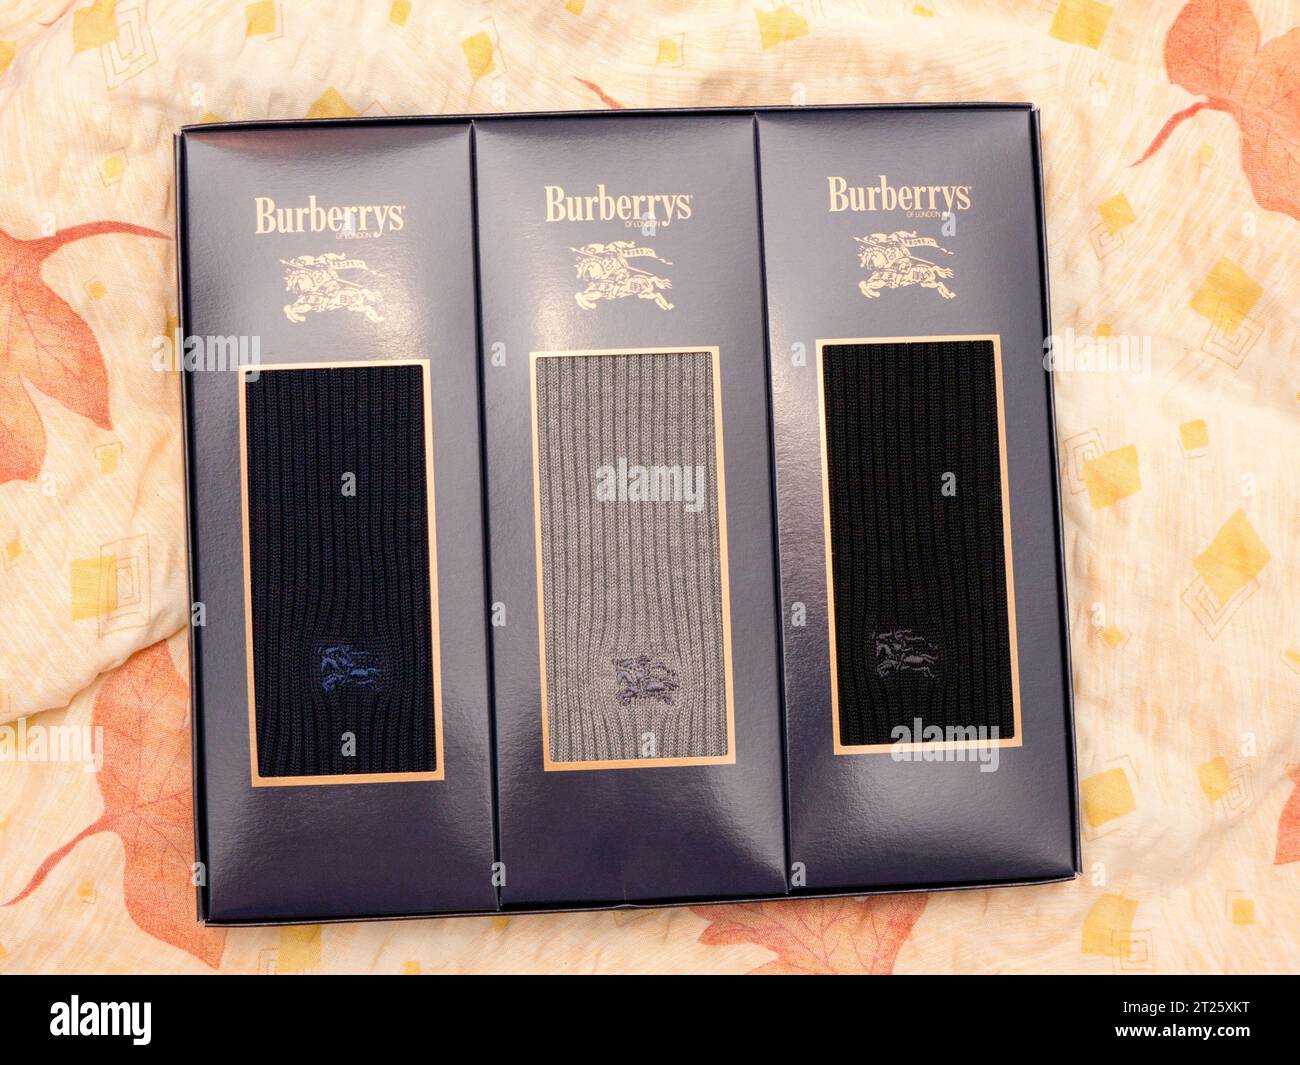 Burberrys socks. Burberry Group plc is a British luxury fashion house established in 1856 by Thomas Burberry and headquartered in London, England. Stock Photo